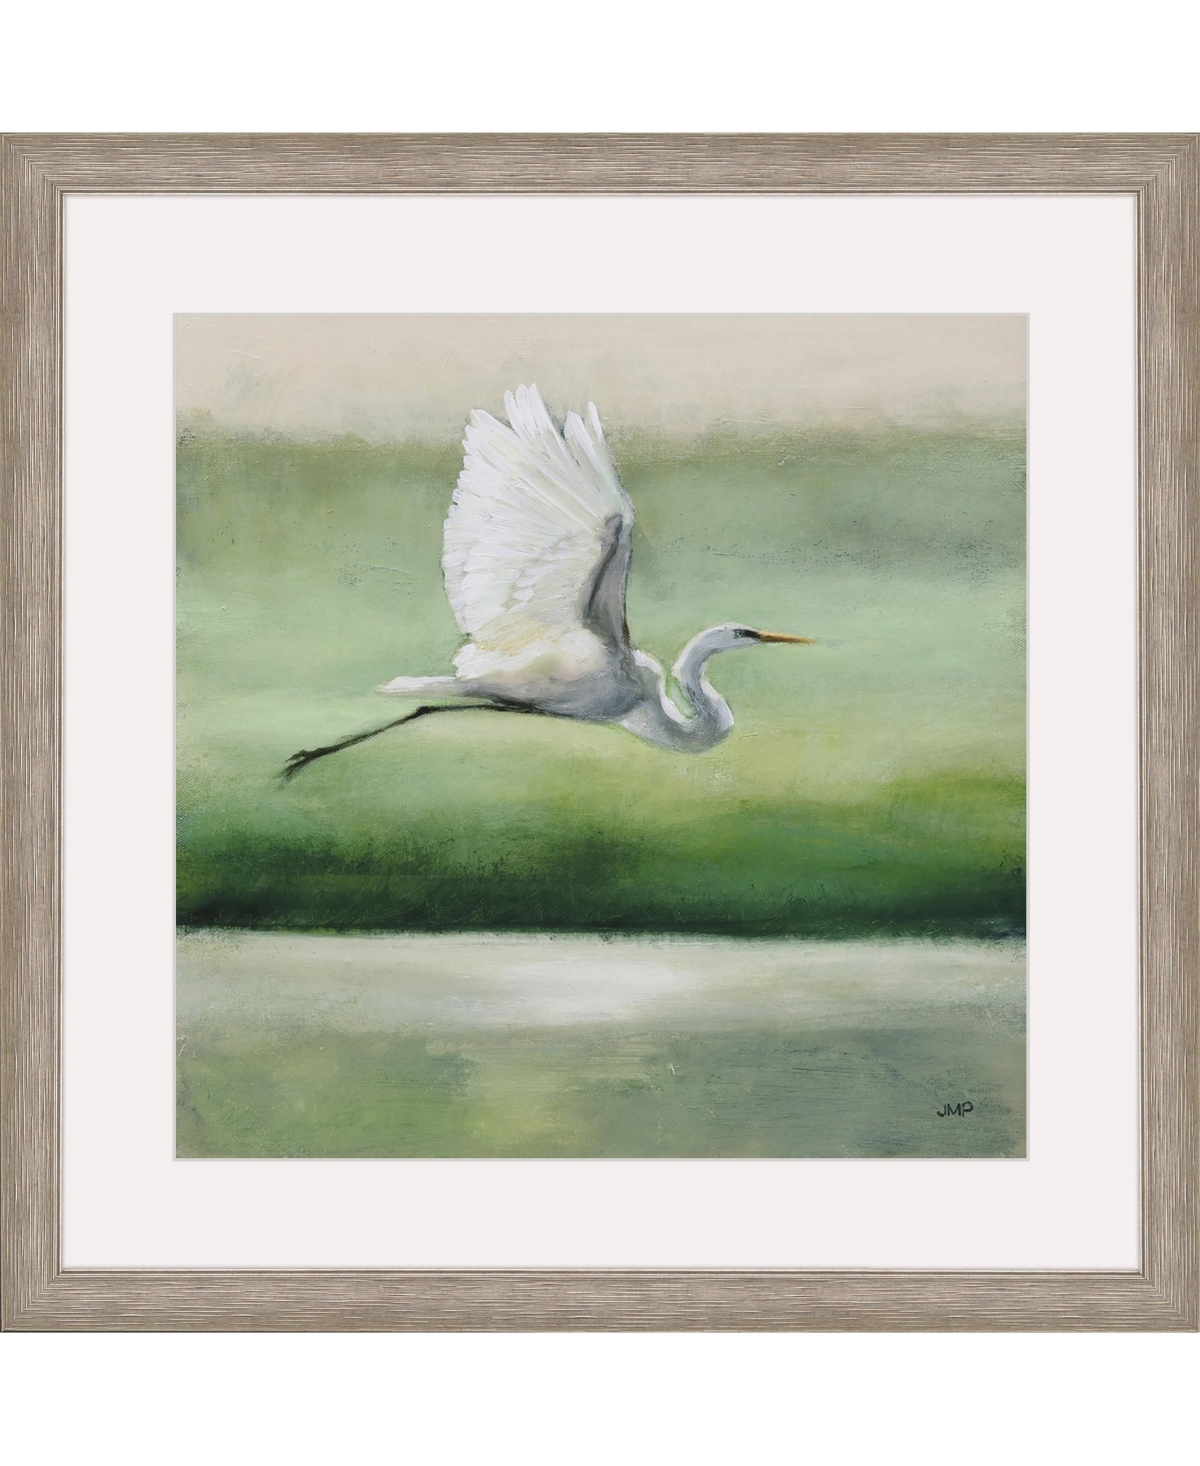 Paragon Picture Gallery Flight Framed Art In Green